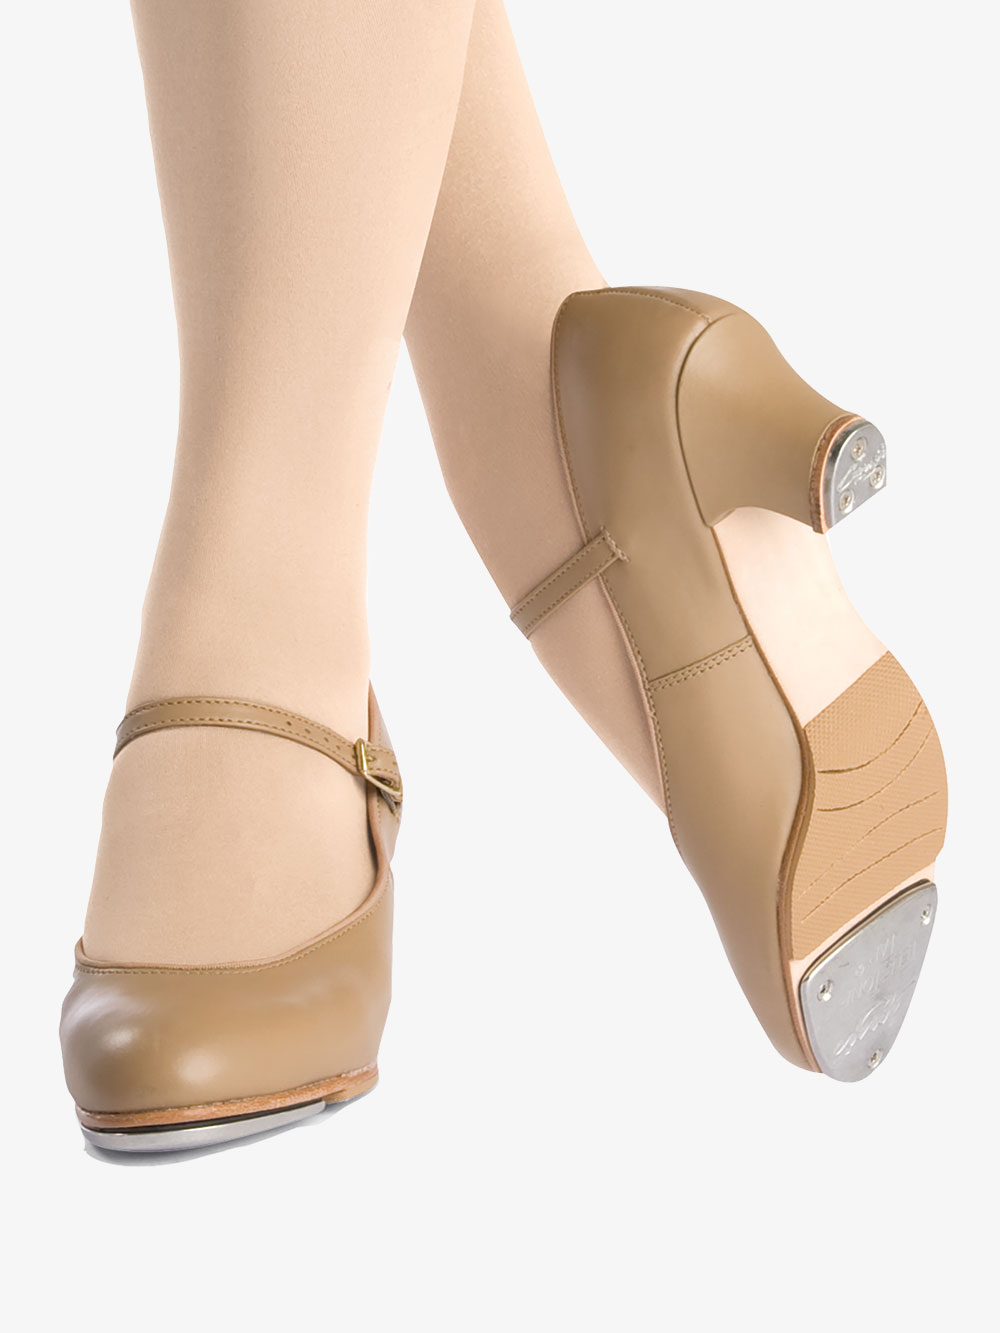 heel taps for tap shoes